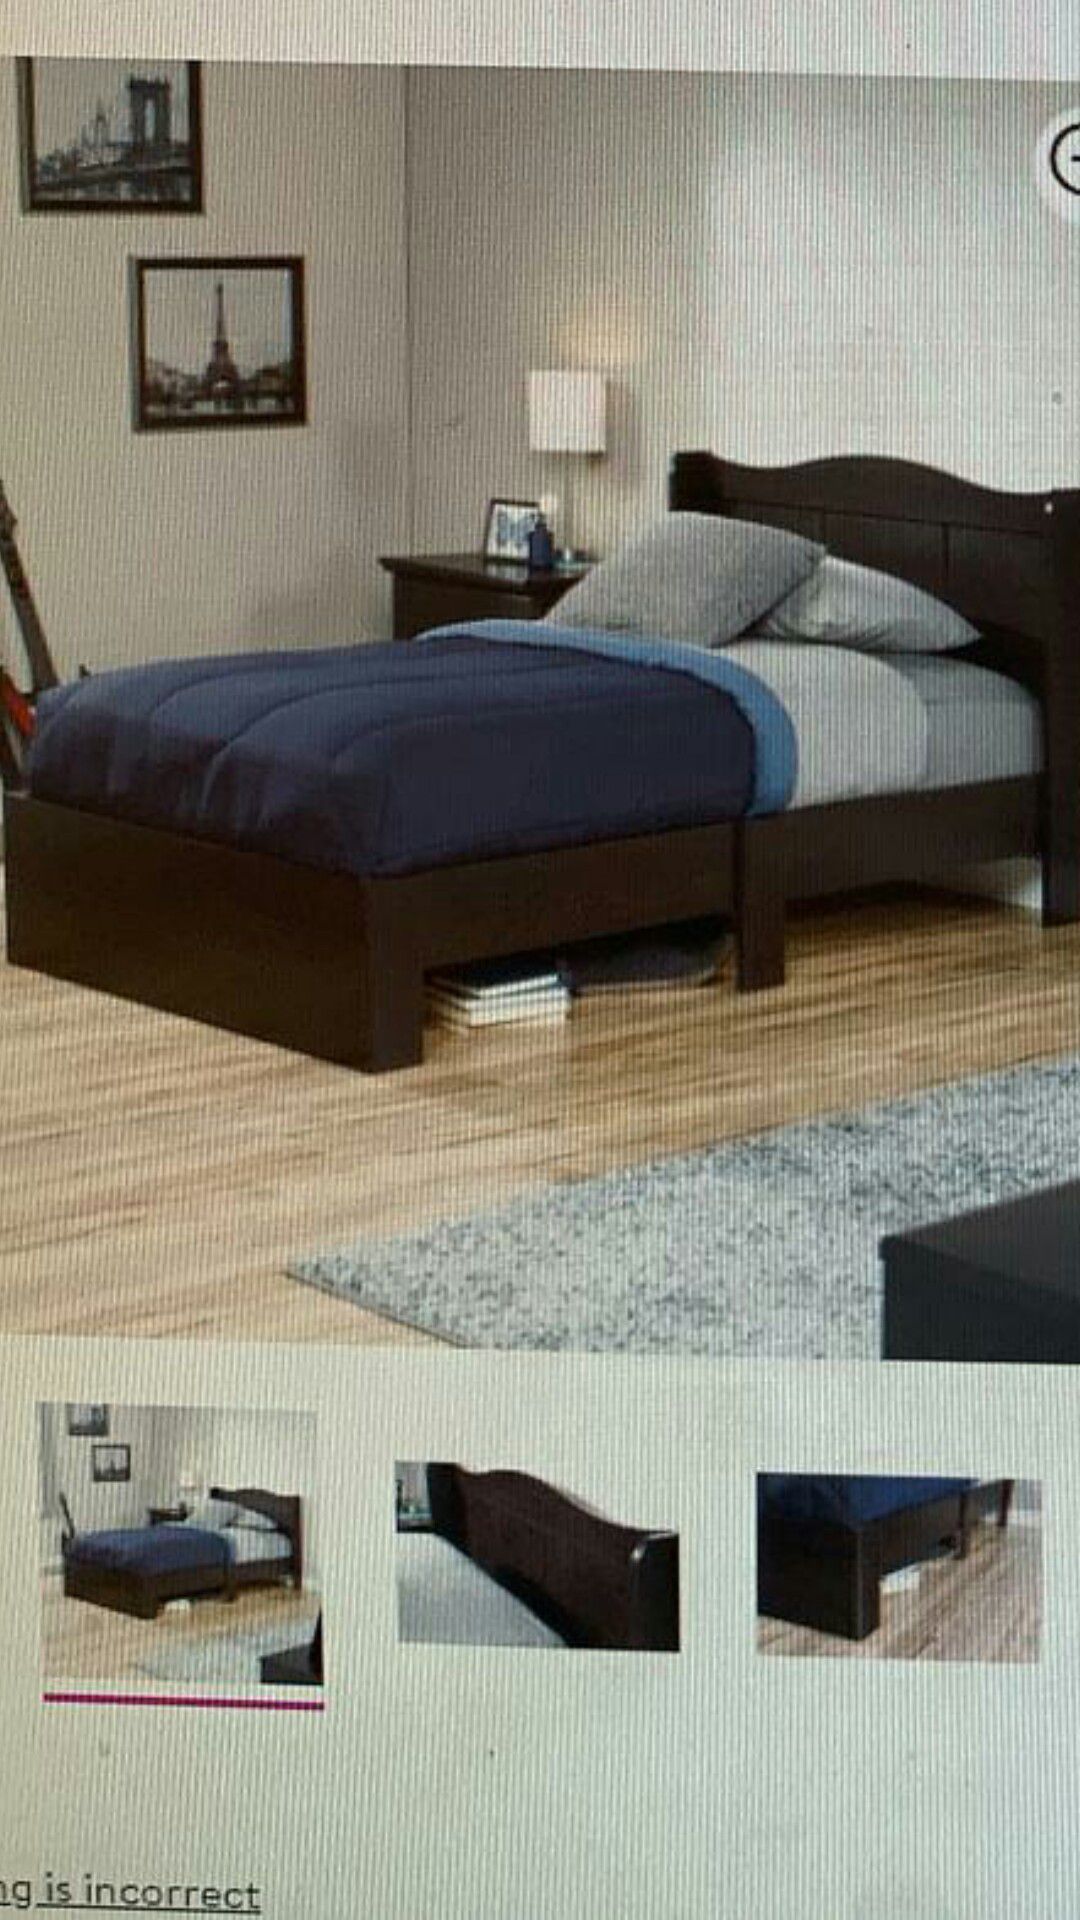 Sauder Storybook Twin mate bed. Jamocha Wood Finish! Does not include matress! Serious buyers only!